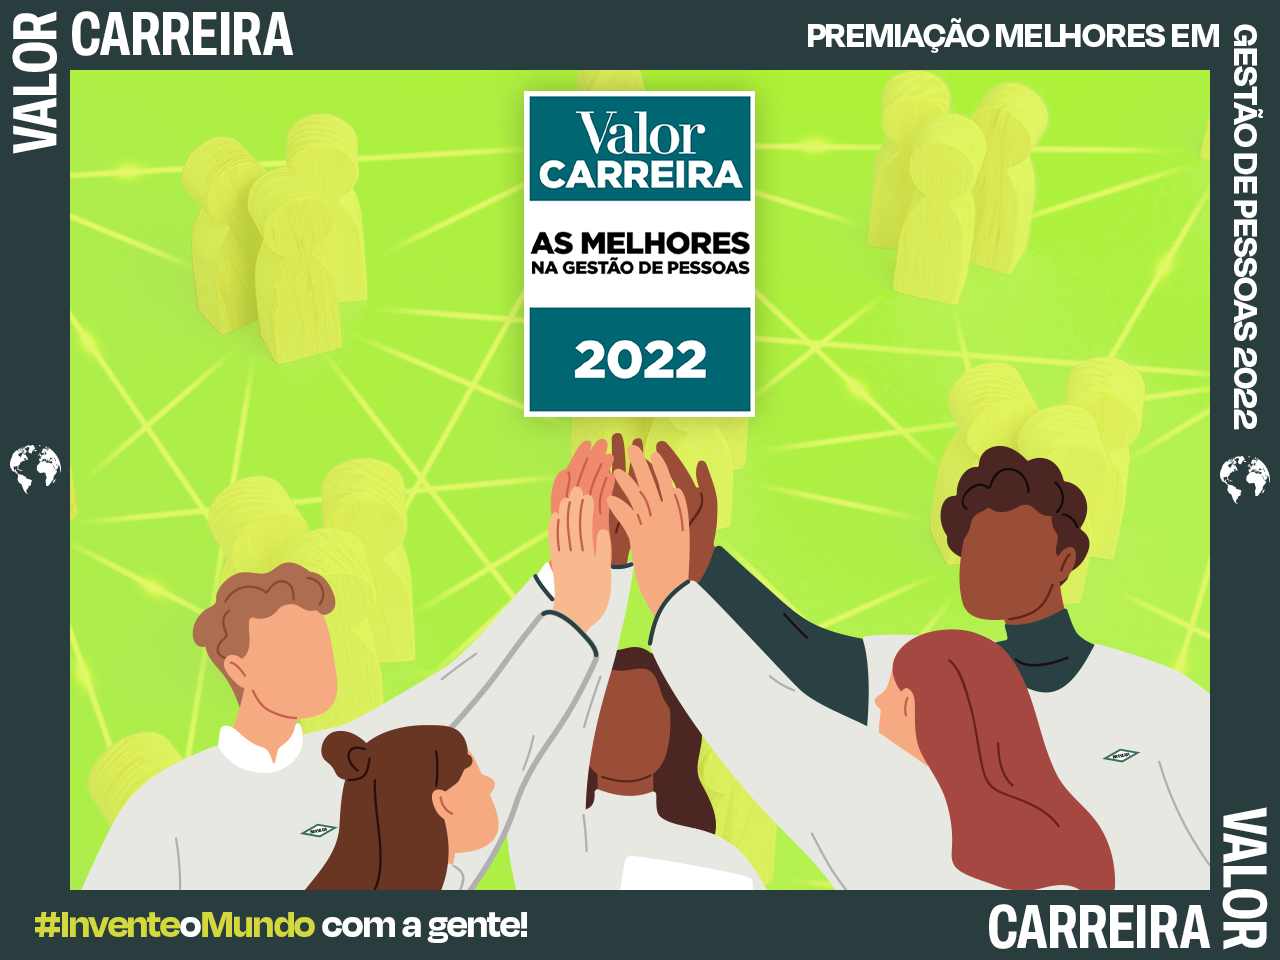 Meet the winners of the &quot;Valor Carreira&quot; 2022 award